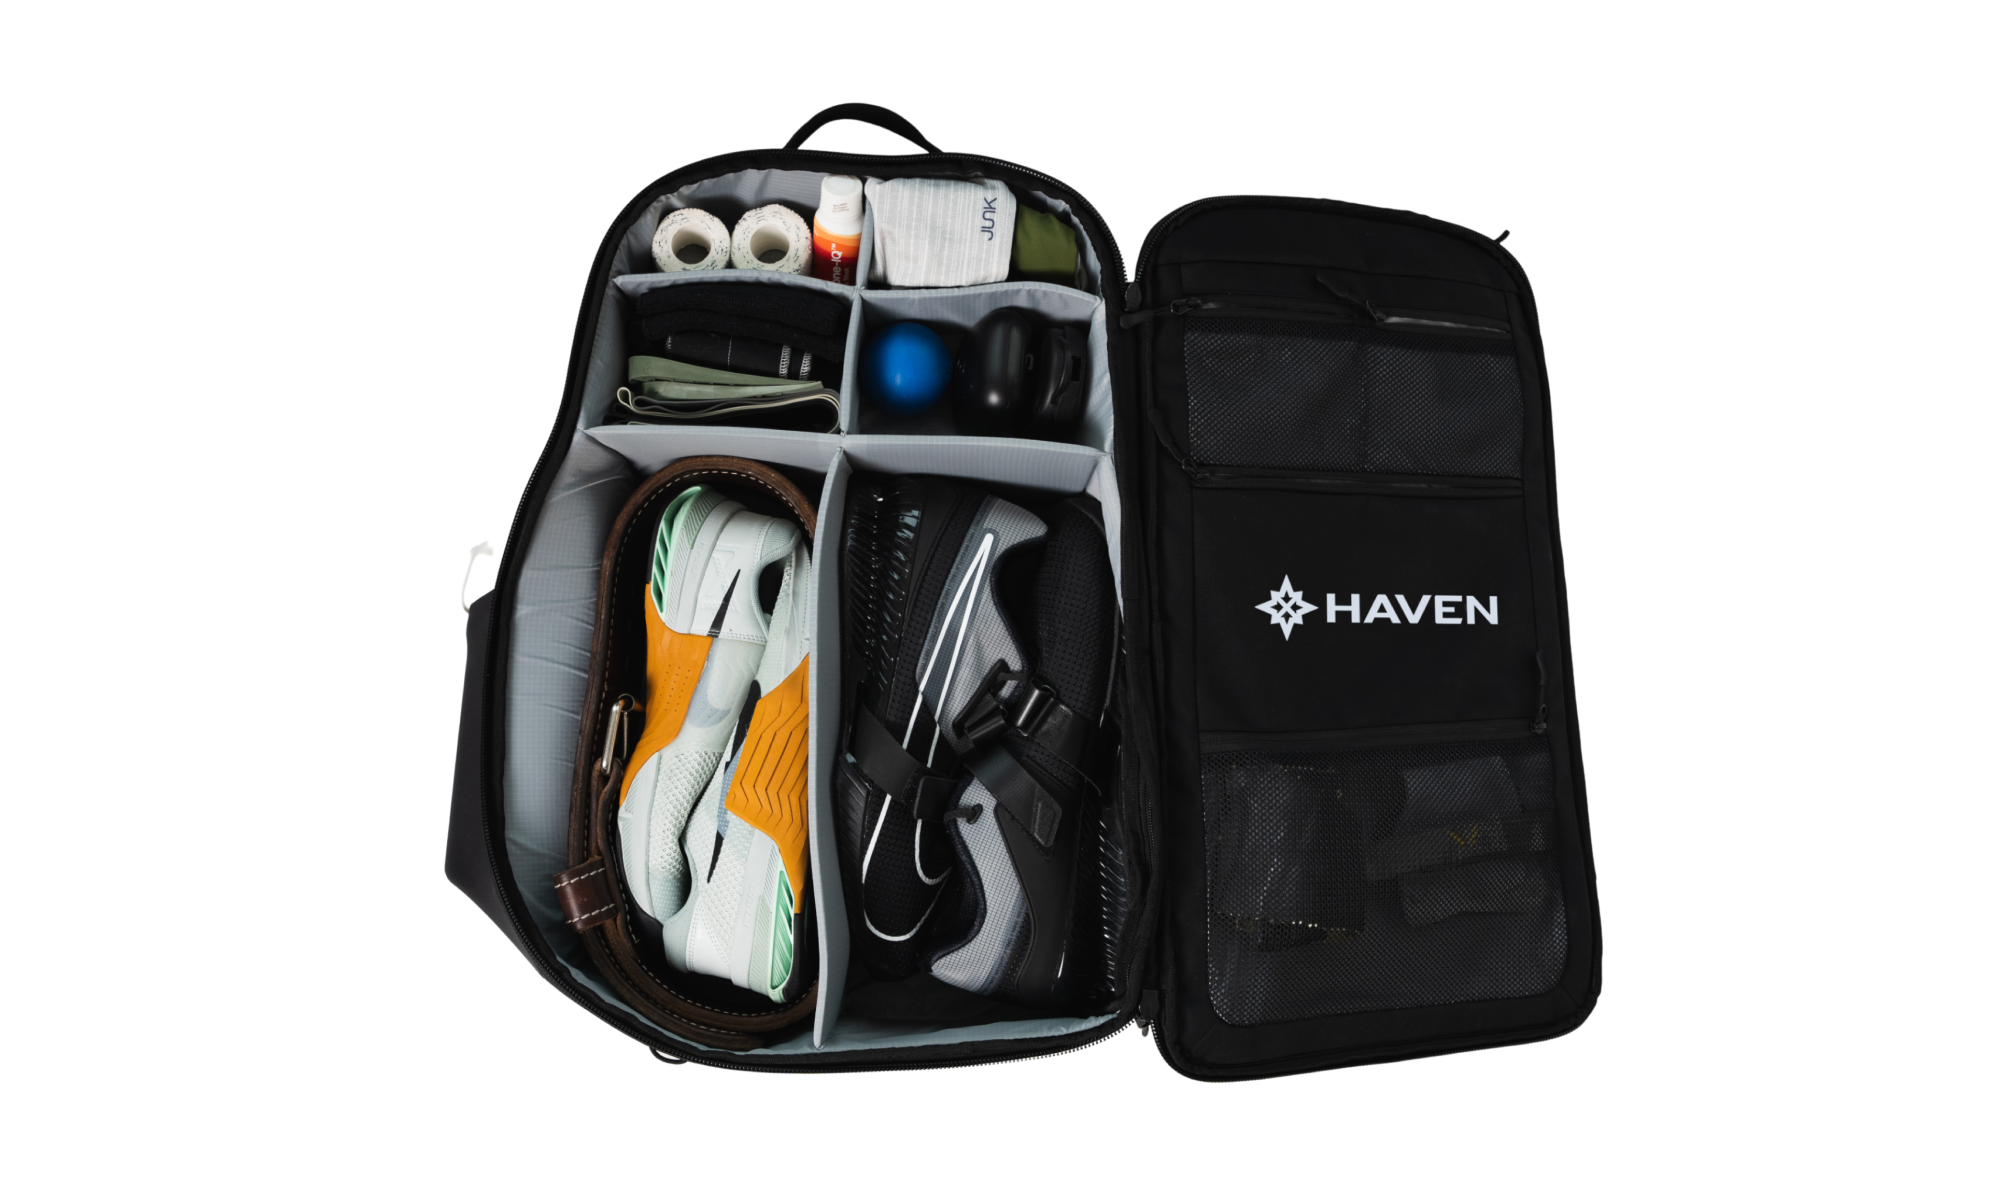 The Small Backpack - Organized Gym Bag with Vented Shoe Garage & Compartments | for Athletes, Weightlifters, & Professionals | Haven Athletic